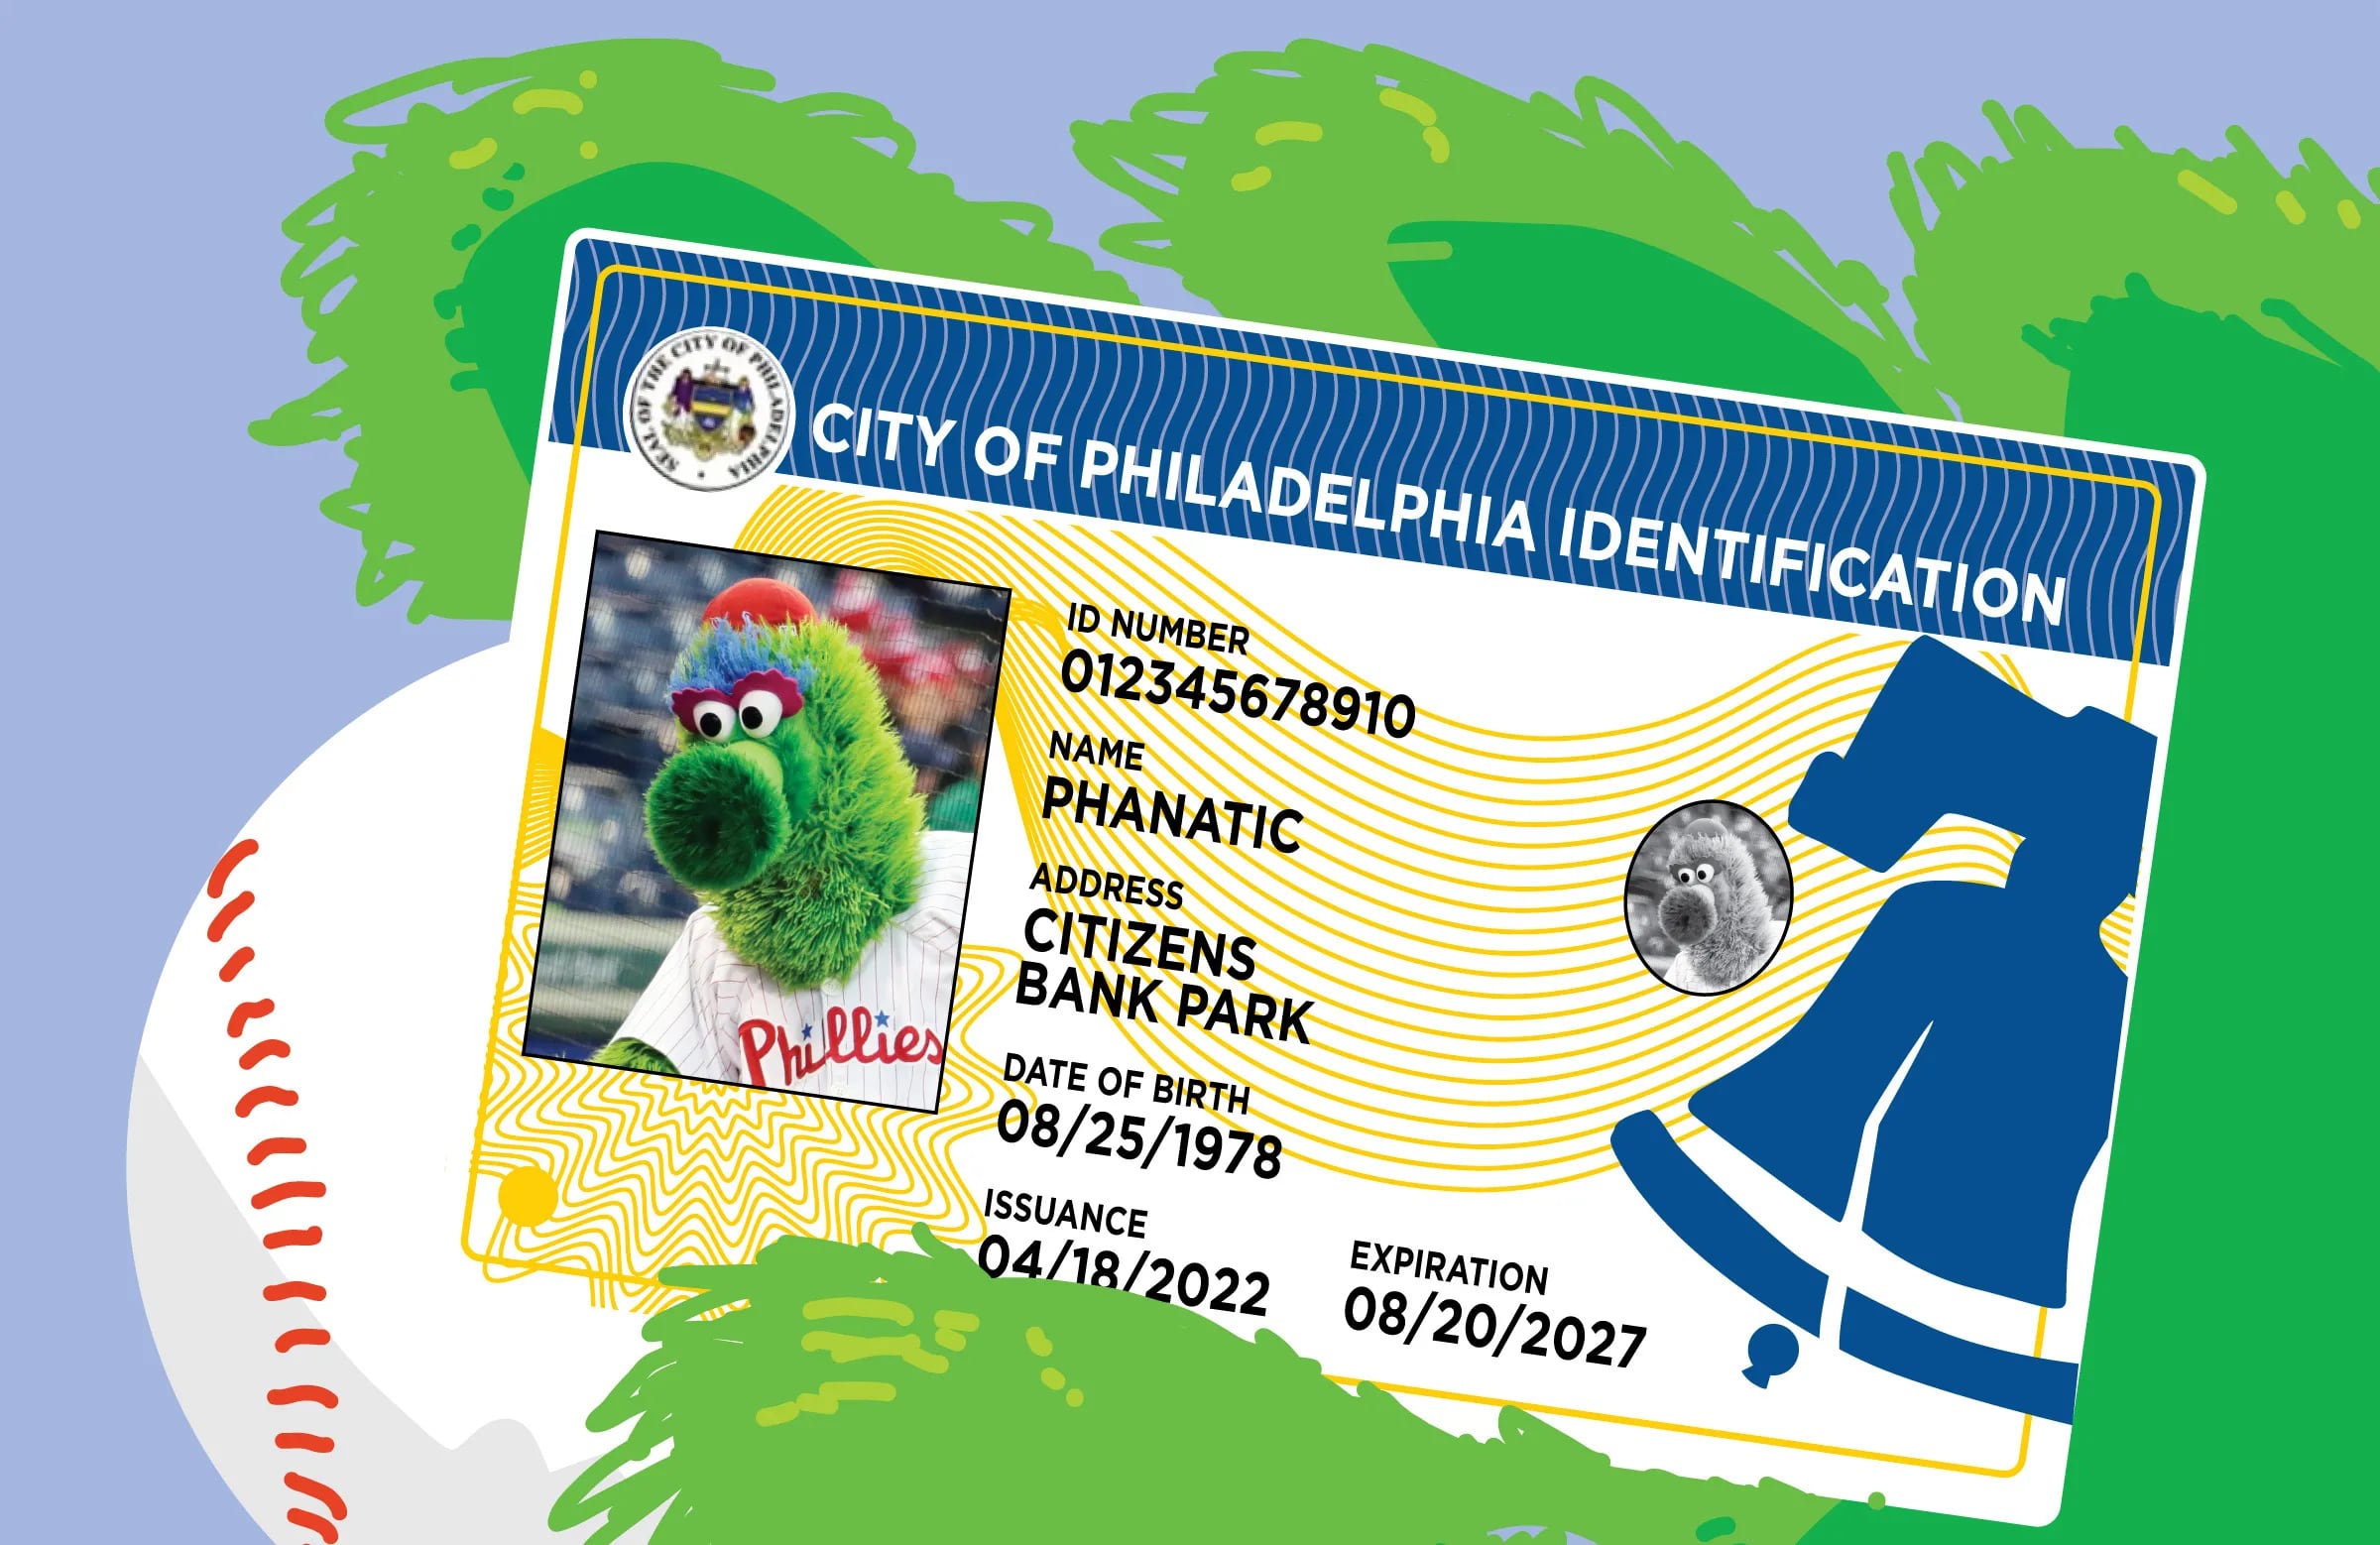 Philly Phanatic's PHL City ID. As long as you can prove your identity and that you live in Philadelphia, you are able to get a municipal photo ID card.